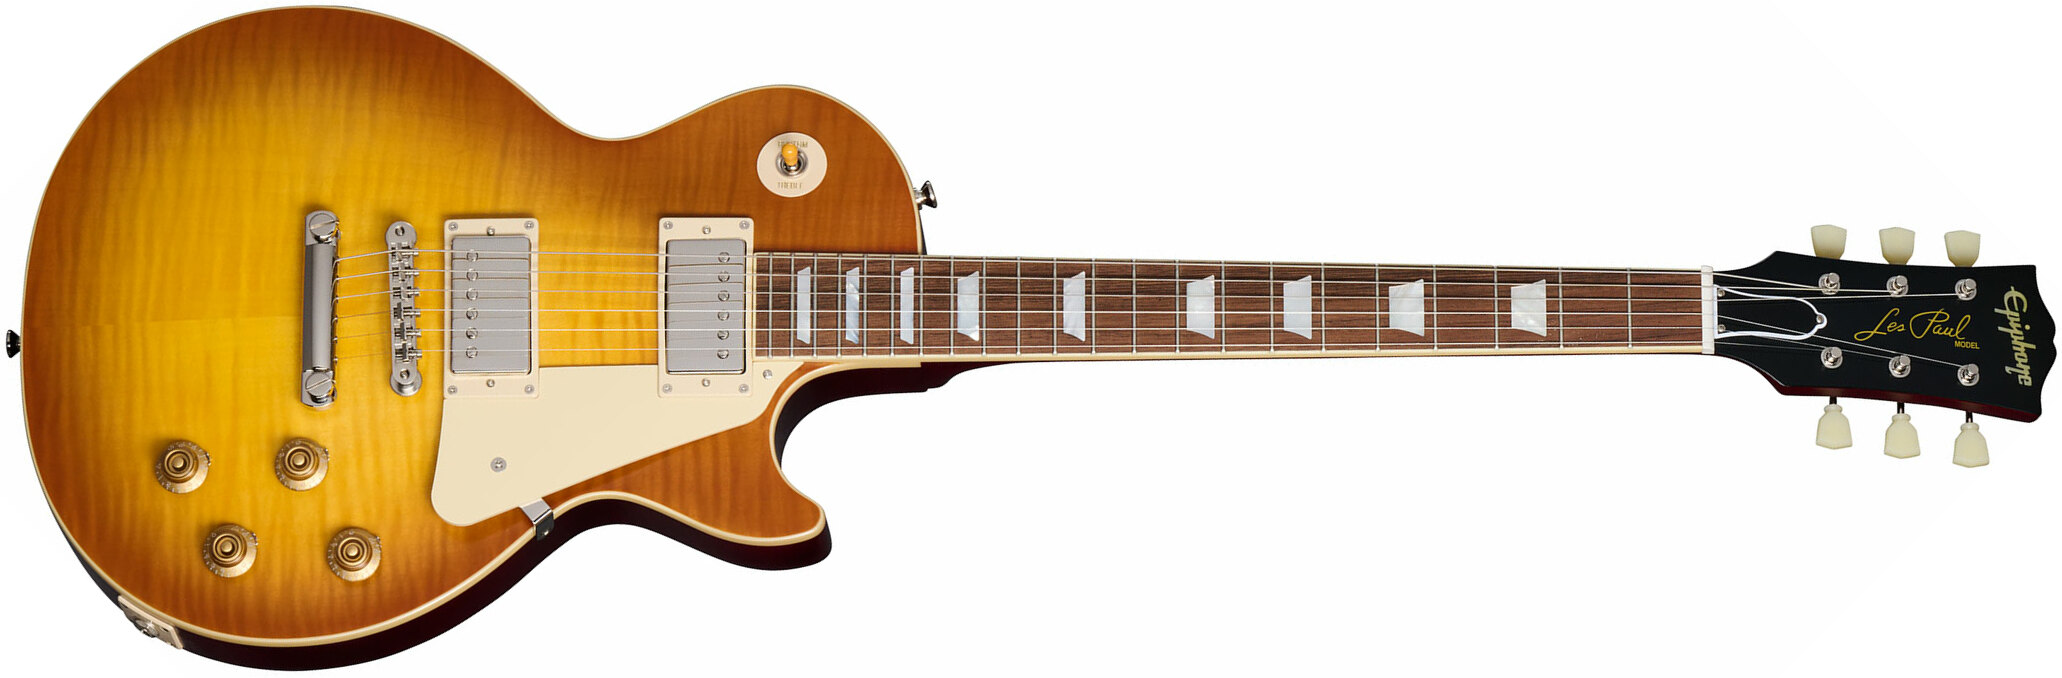 Epiphone 1959 Les Paul Standard Inspired By 2h Gibson Ht Lau - Vos Iced Tea Burst - Single cut electric guitar - Main picture